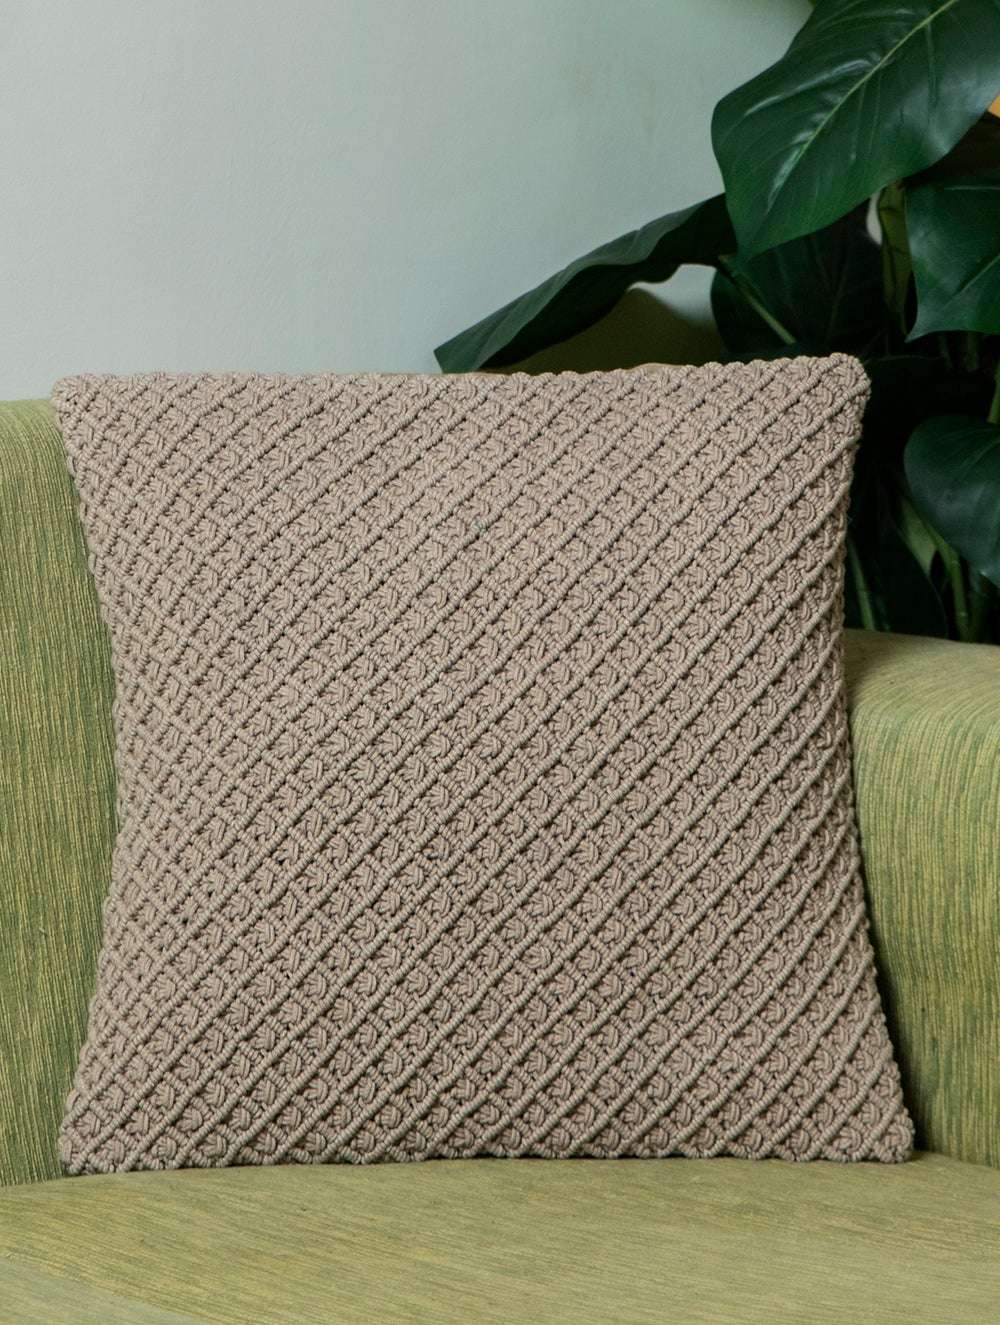 Load image into Gallery viewer, Jewel Handknotted Macramé Cushion Covers 16 x 16 - Dark Beige